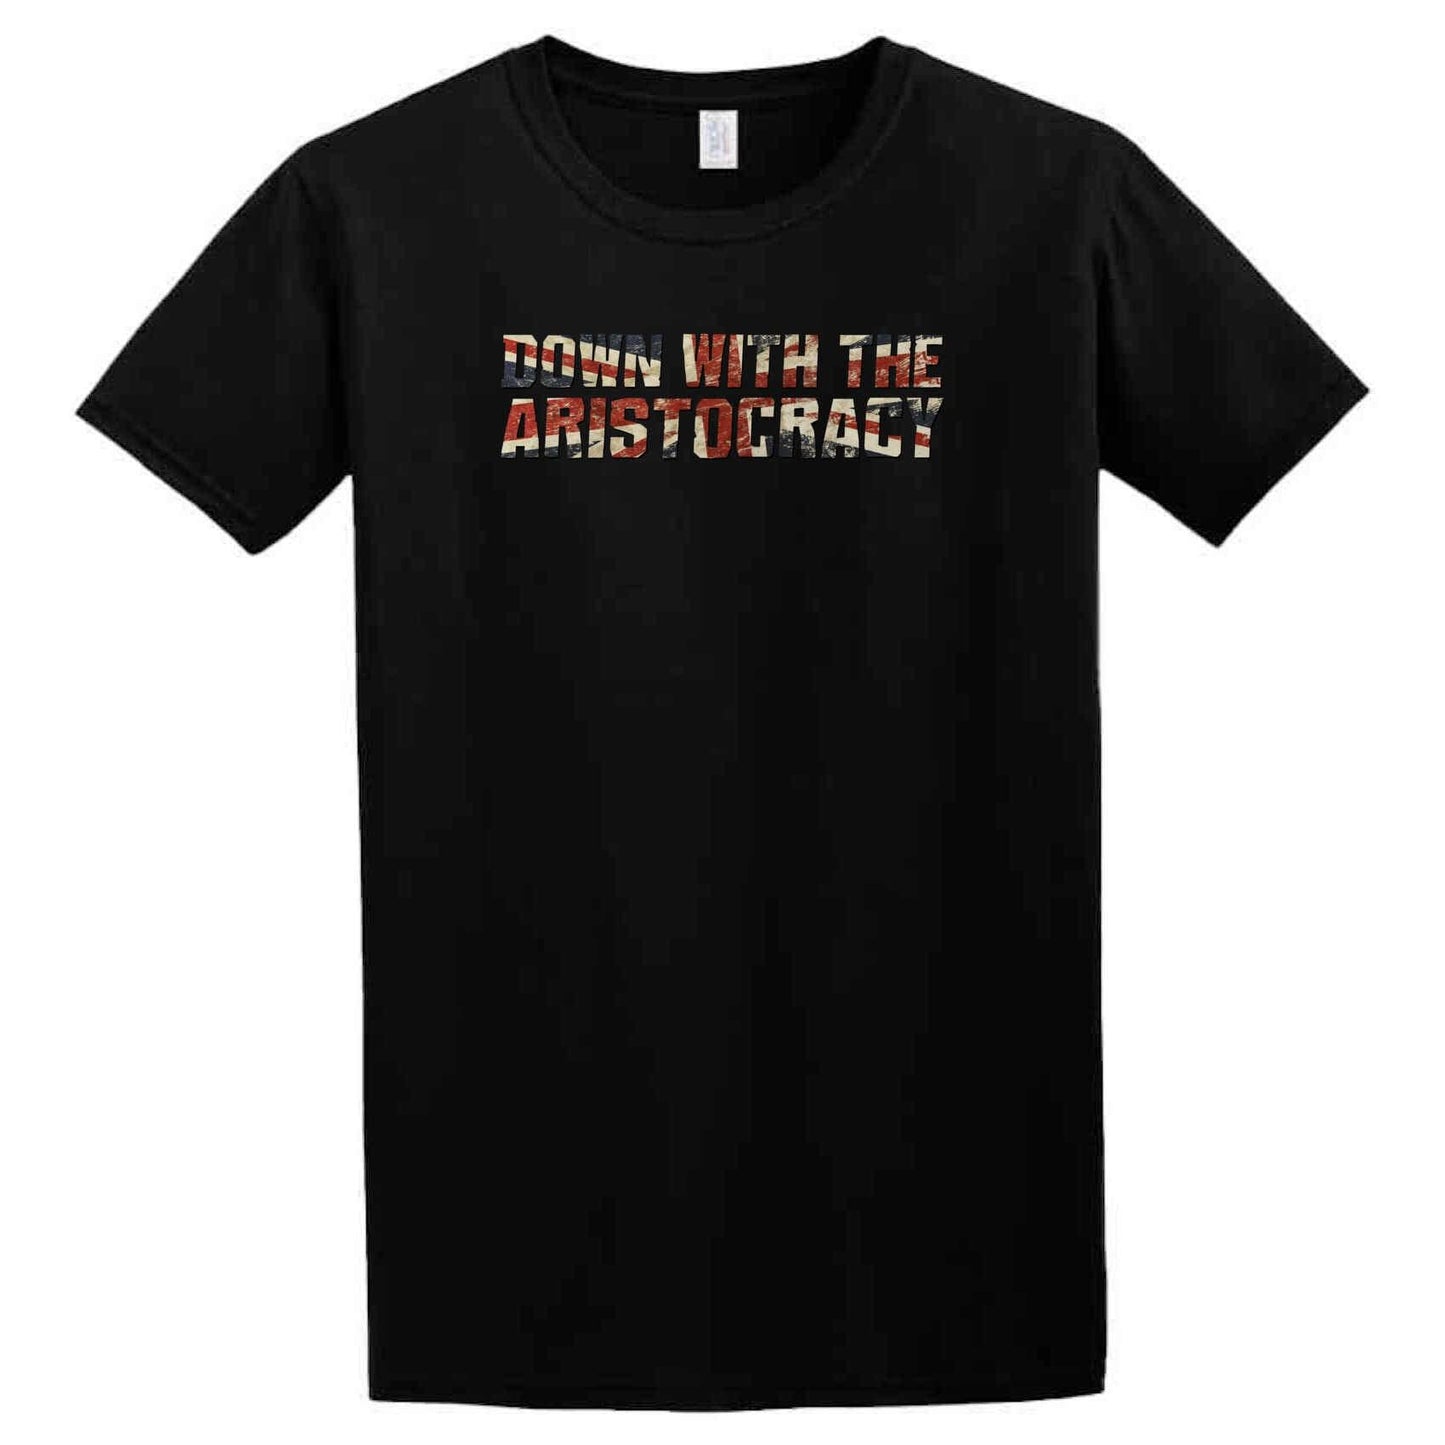 A Twisted Gifts black Aristocracy T-Shirt with the words "don't mess with the apocalypse?" on it, fitting for political junkies interested in the monarchy system or individuals favoring an aristocracy.